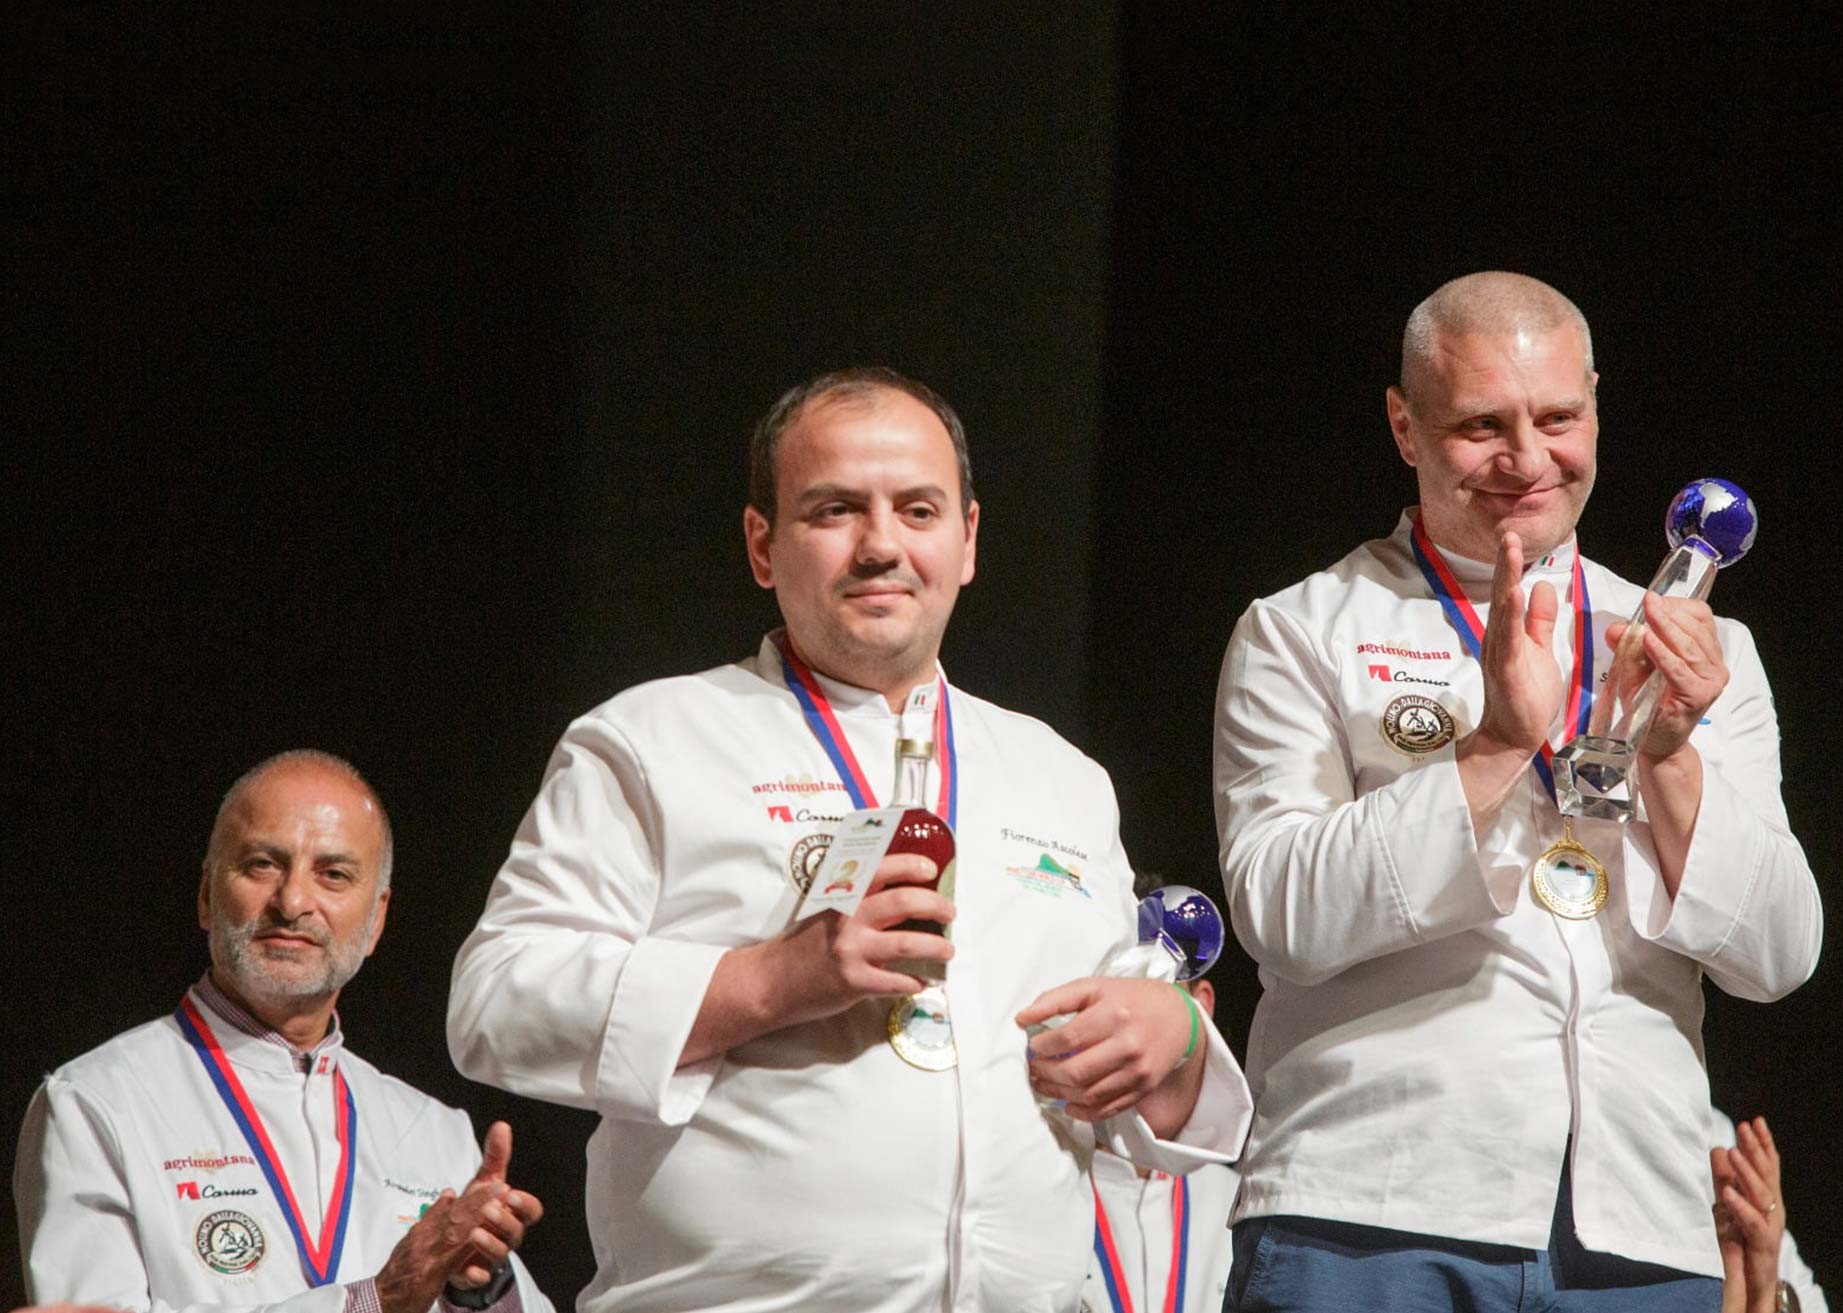 Winners of Panettone World Cup 2021 on the podium